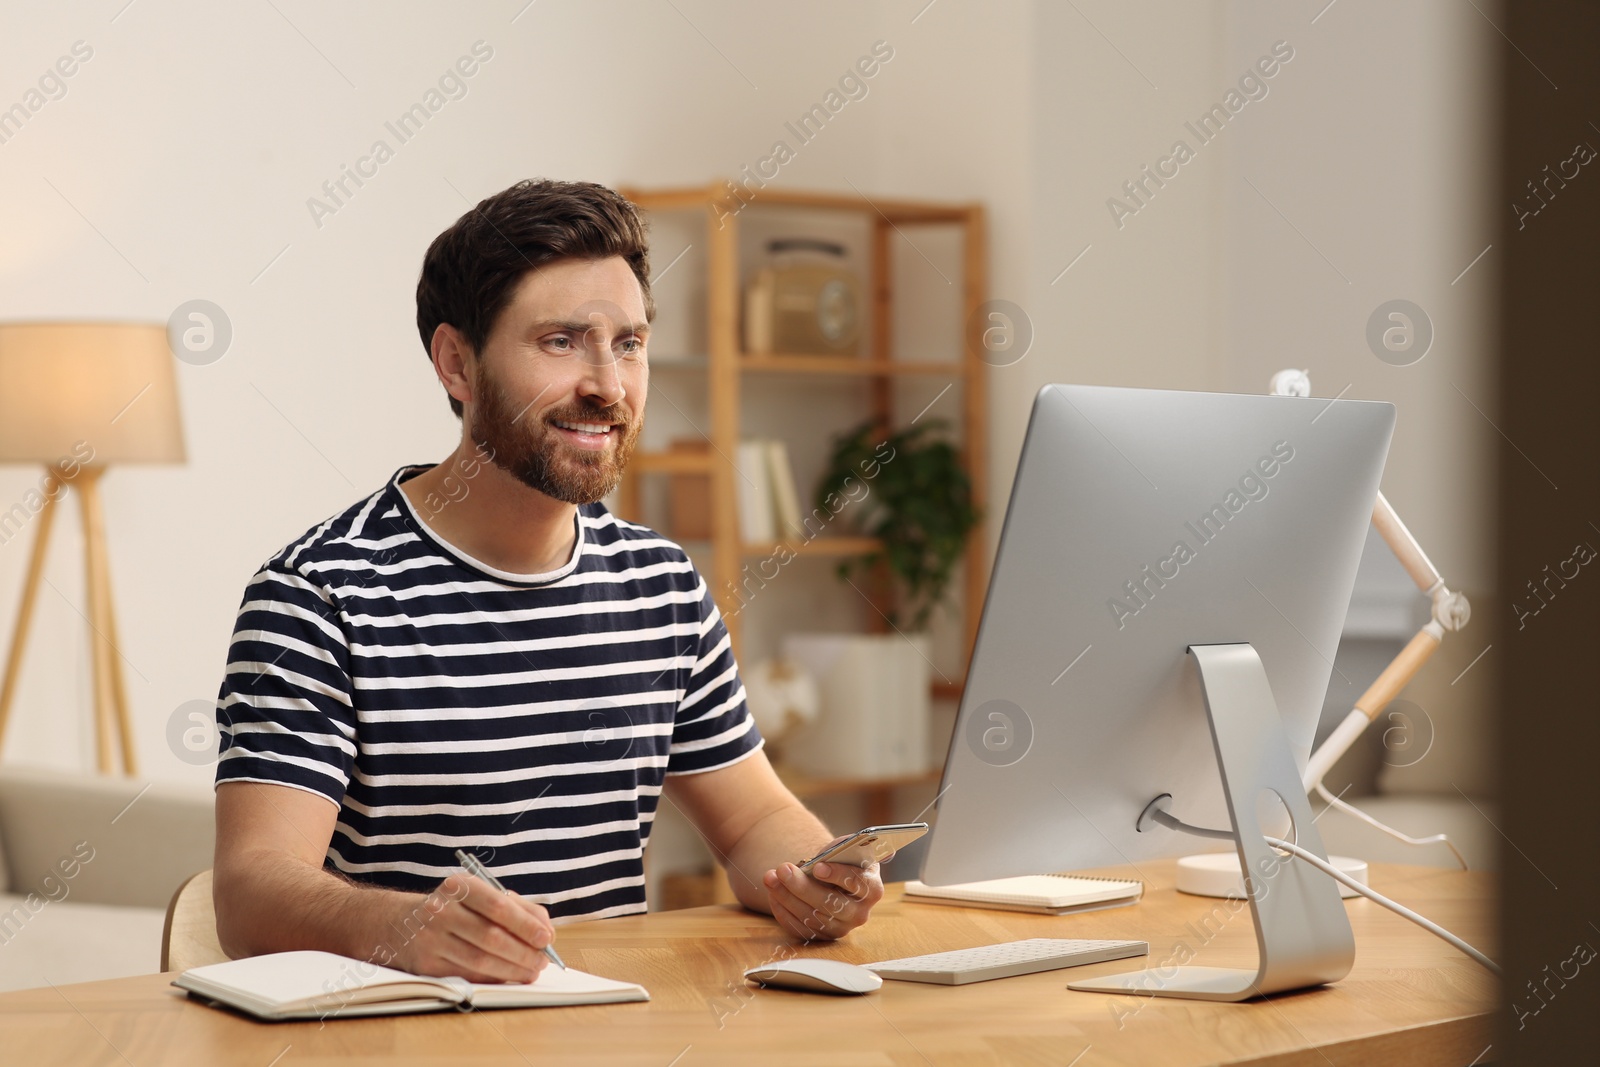 Photo of Home workplace. Happy man using smartphone and taking notes at wooden desk in room